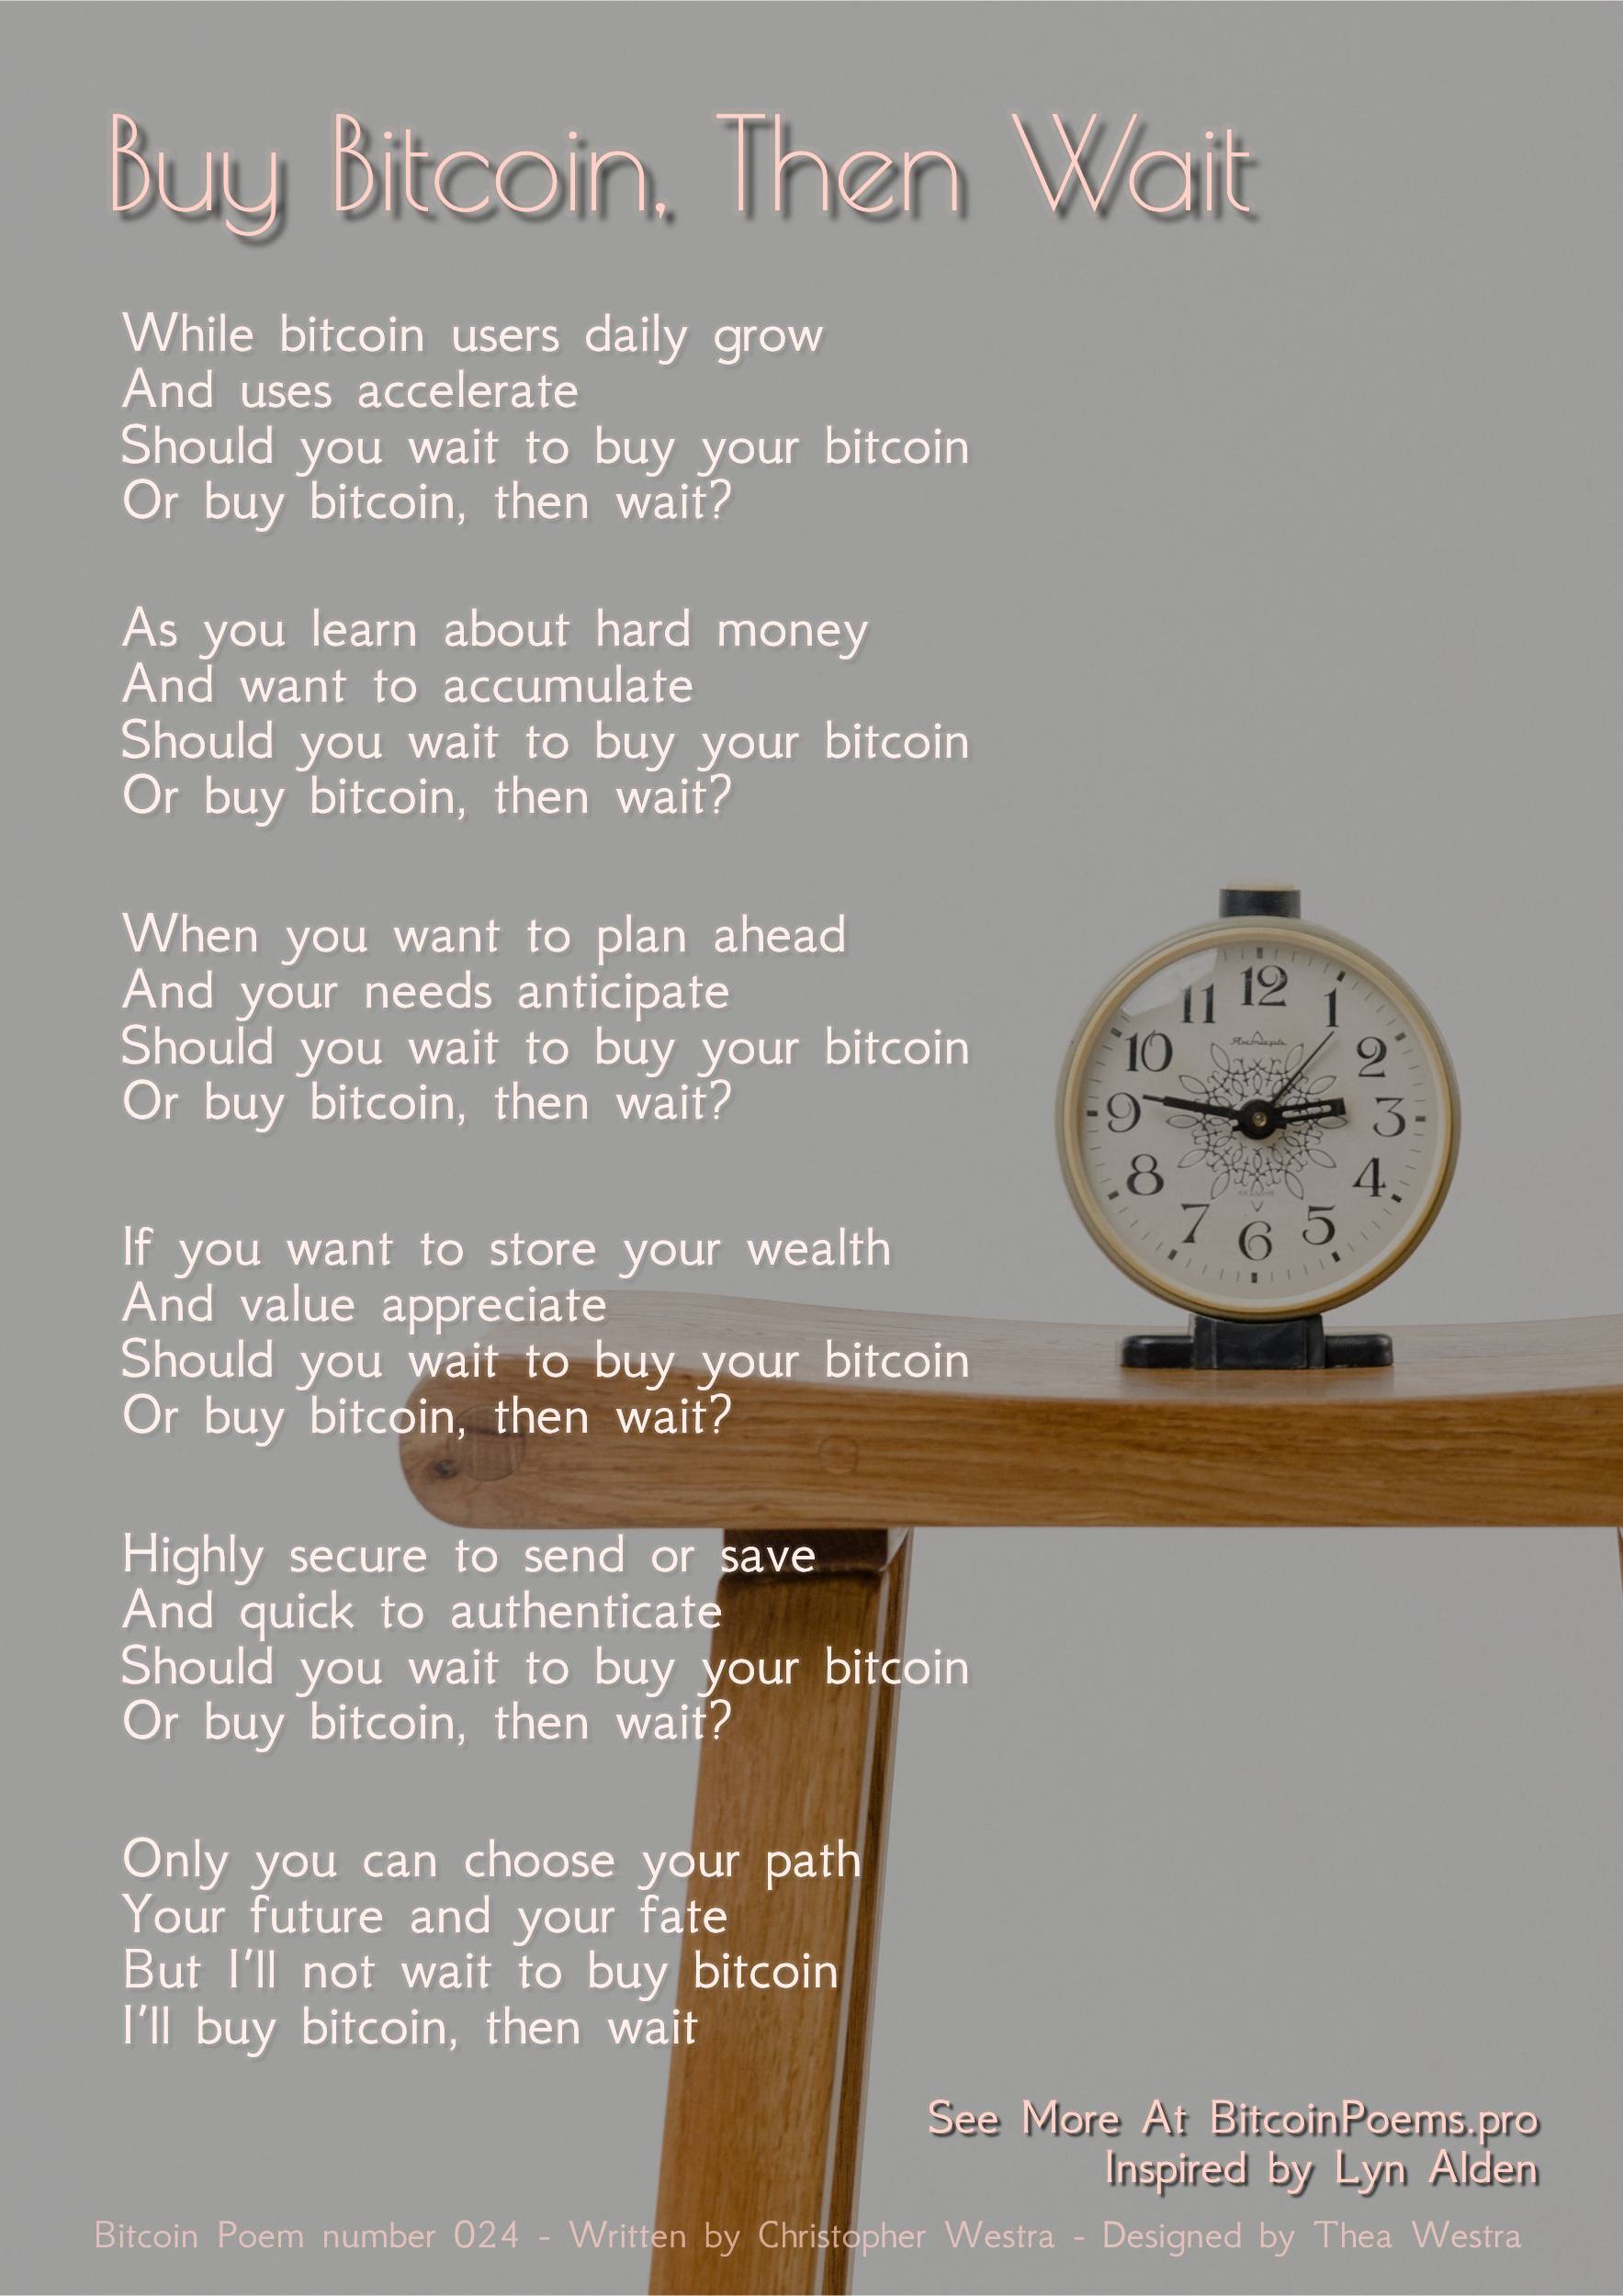 Buy Bitcoin, Then Wait - Bitcoin Poem 024 by Christopher Westra